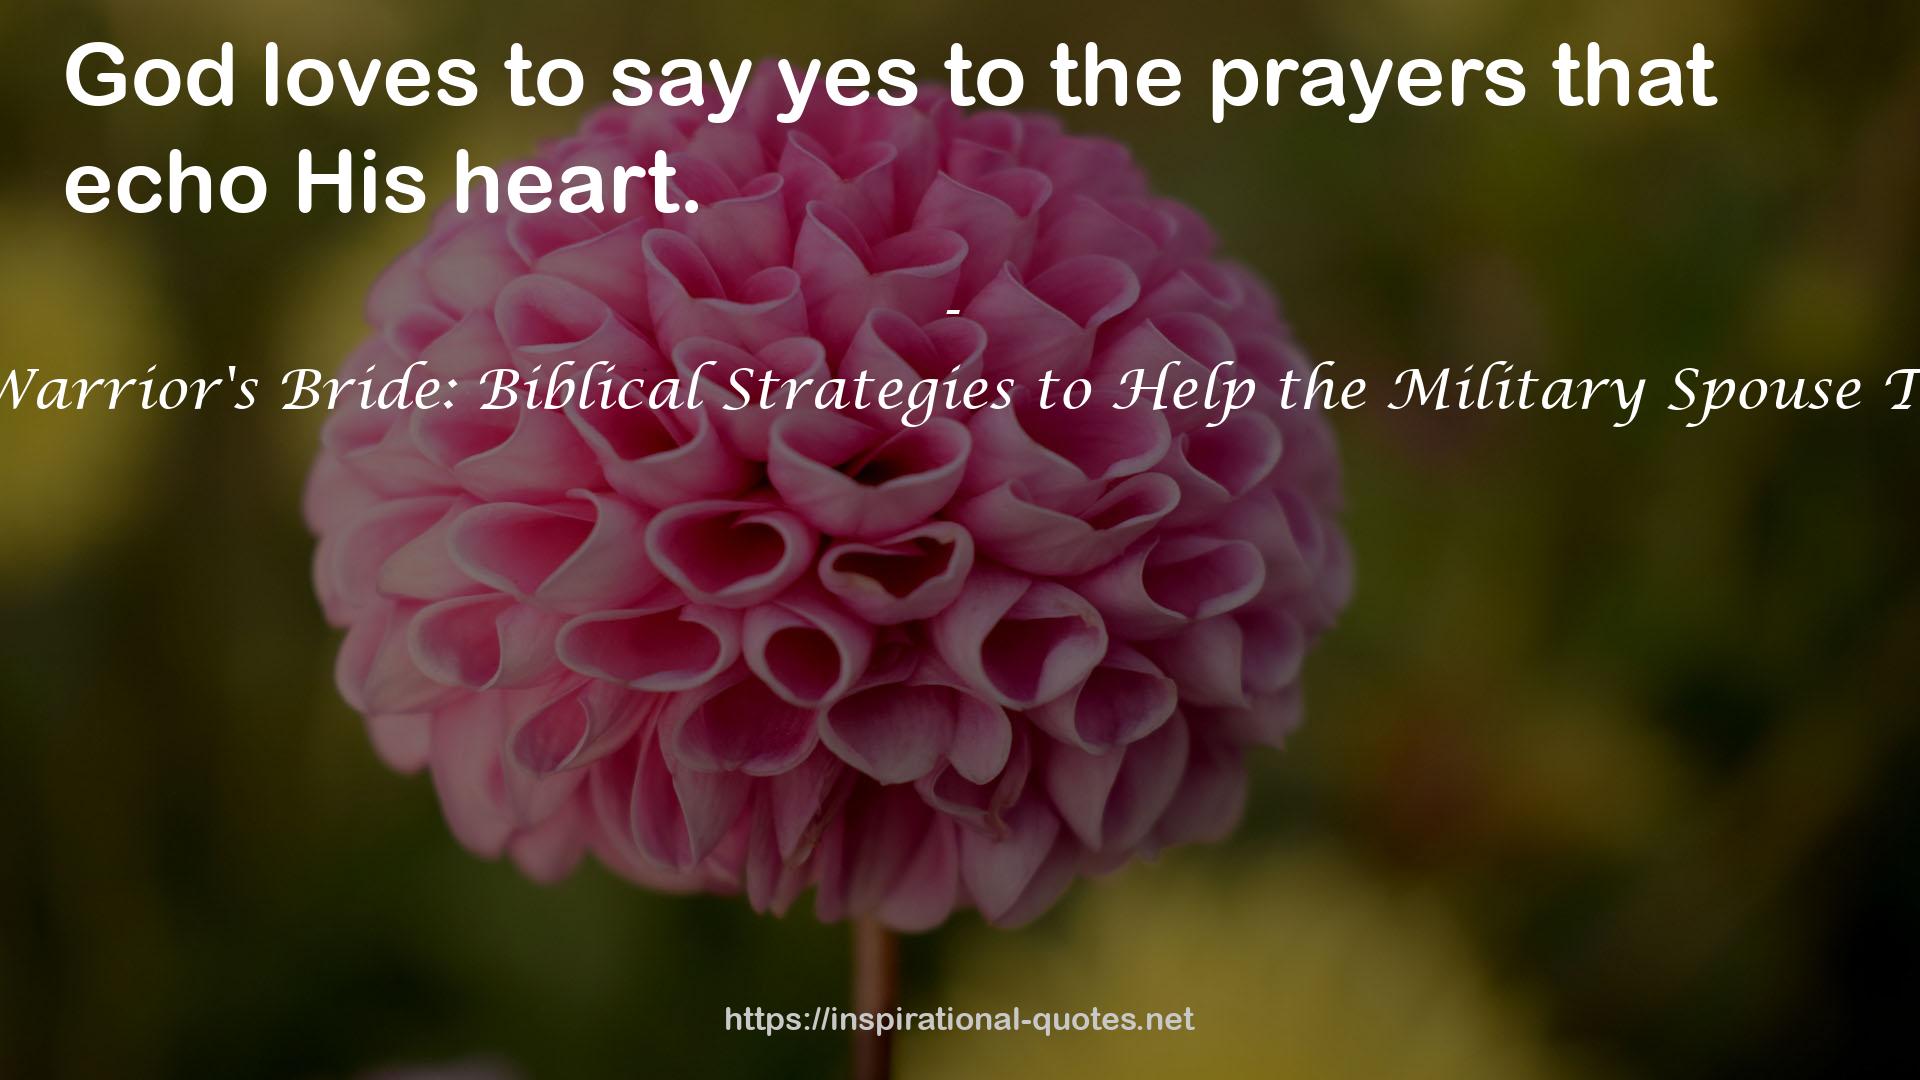 The Warrior's Bride: Biblical Strategies to Help the Military Spouse Thrive QUOTES